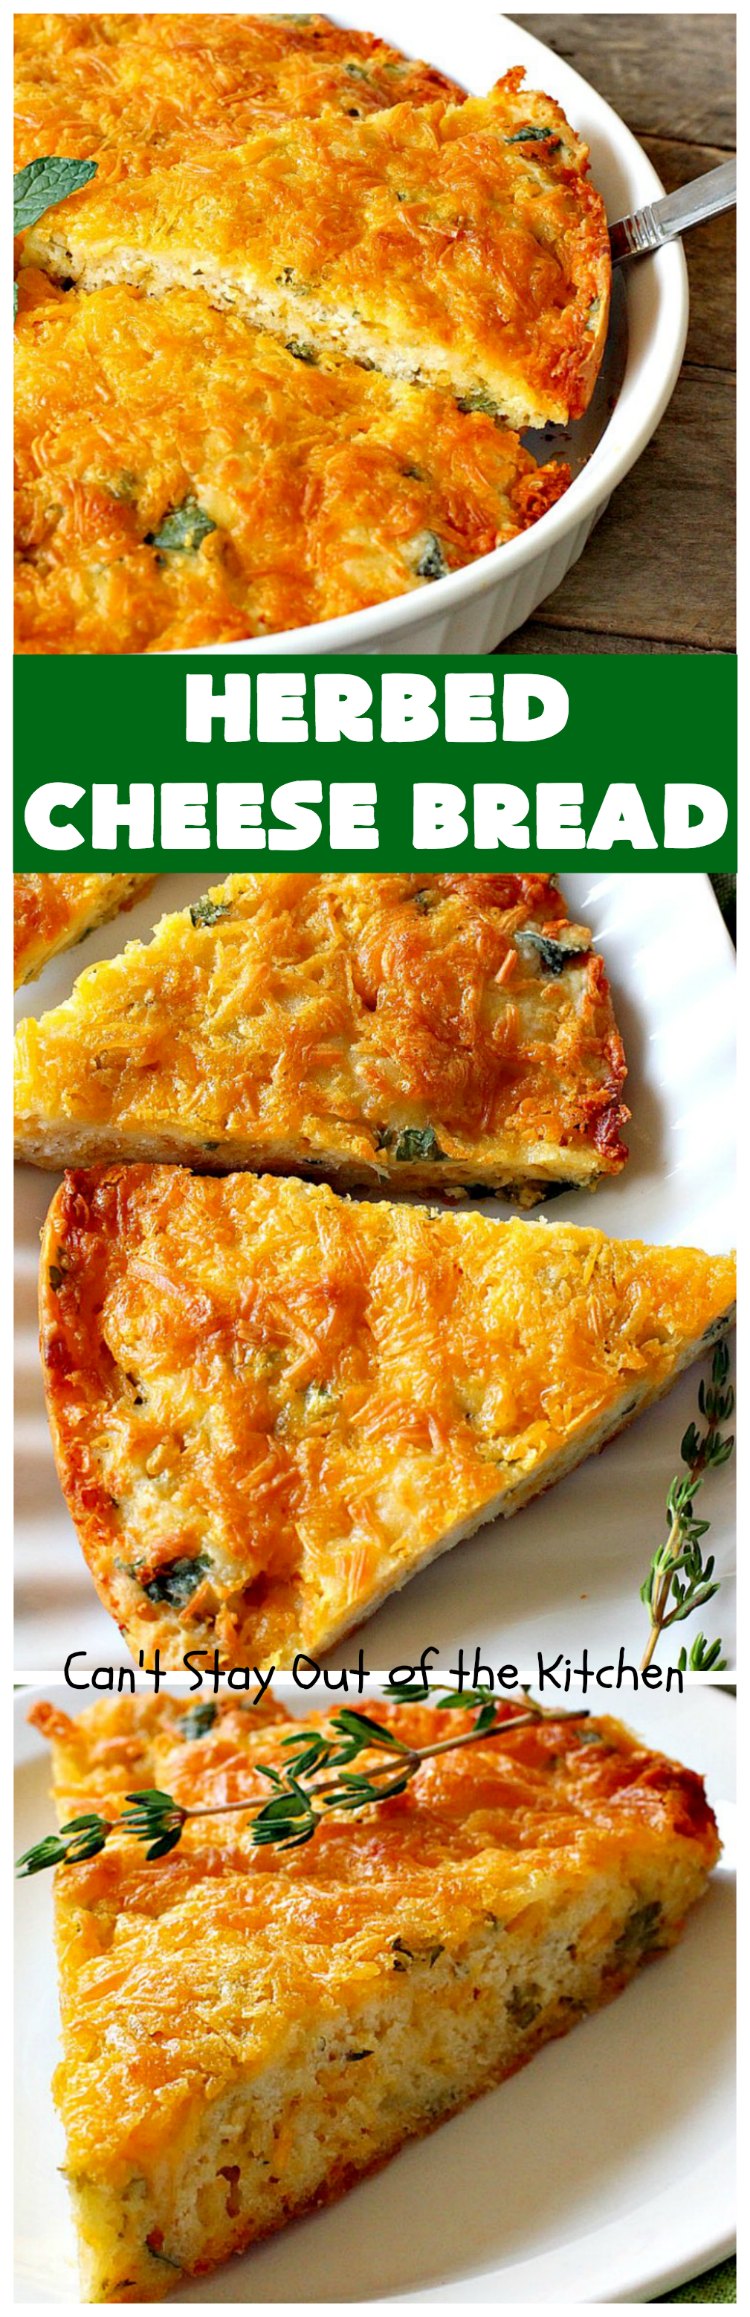 Herbed Cheese Bread | Can't Stay Out of the Kitchen